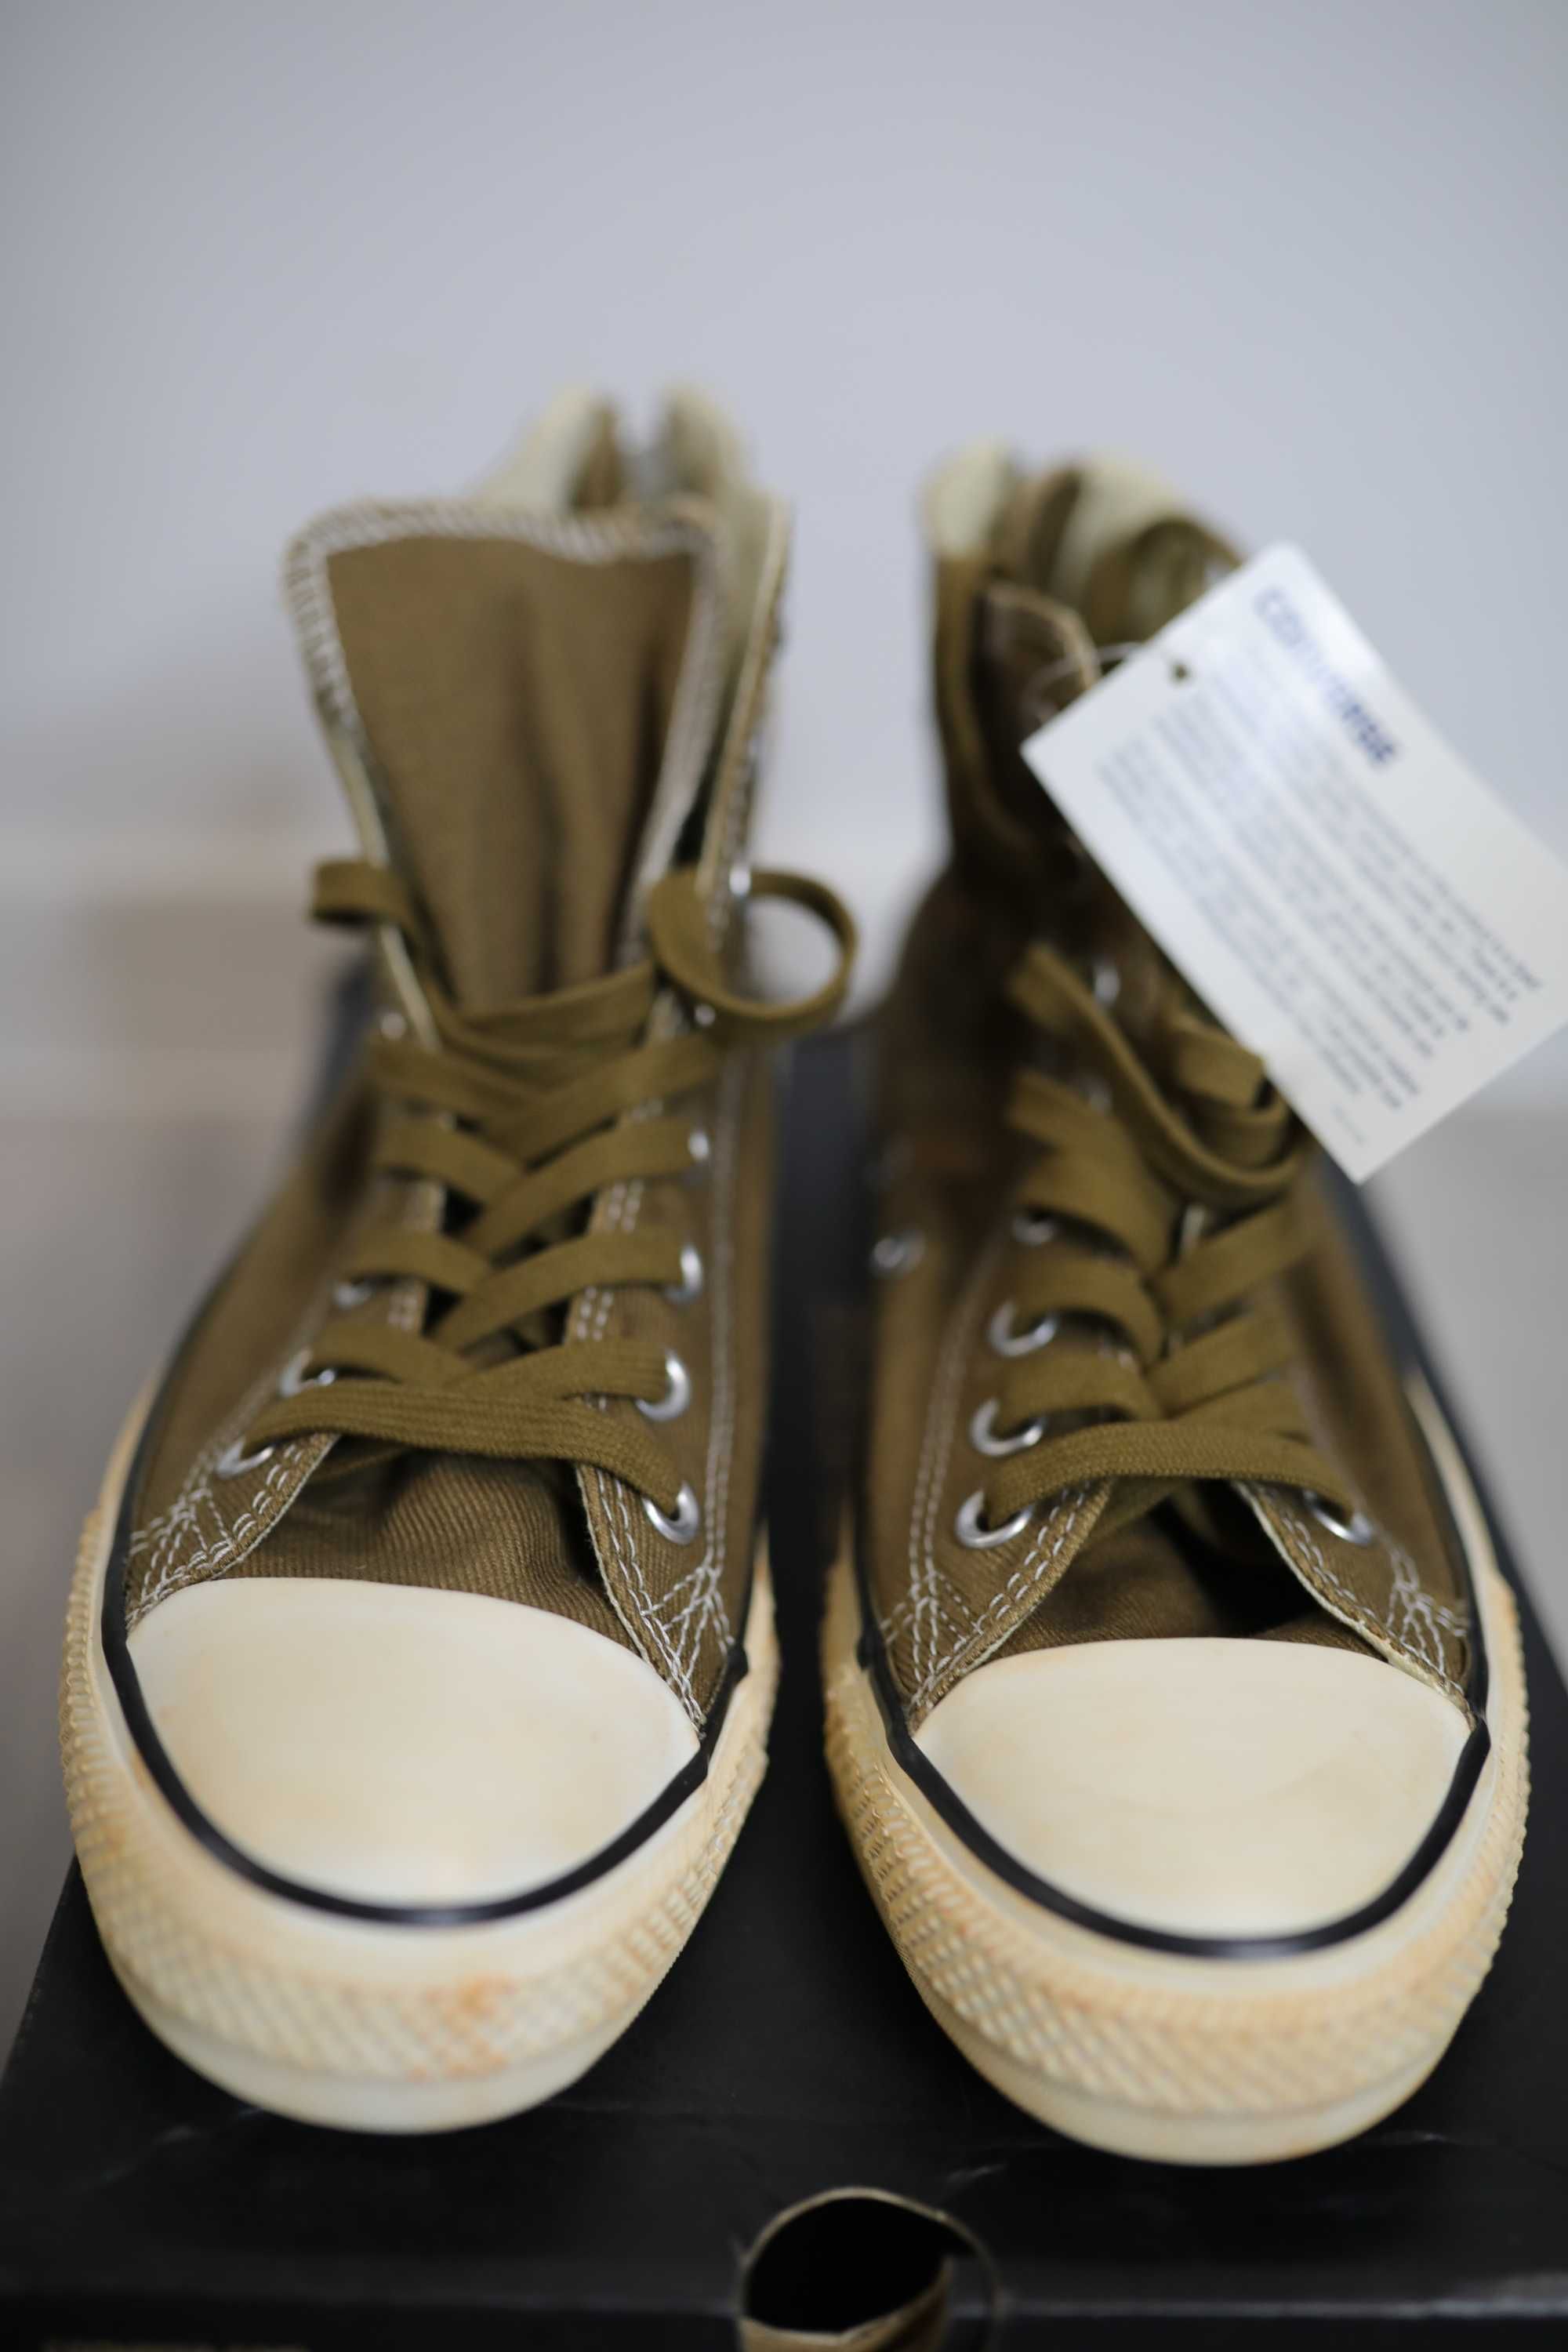 Buty Converse  Chuck Taylor All Star 144771C Back Zip Timber'  R. 40